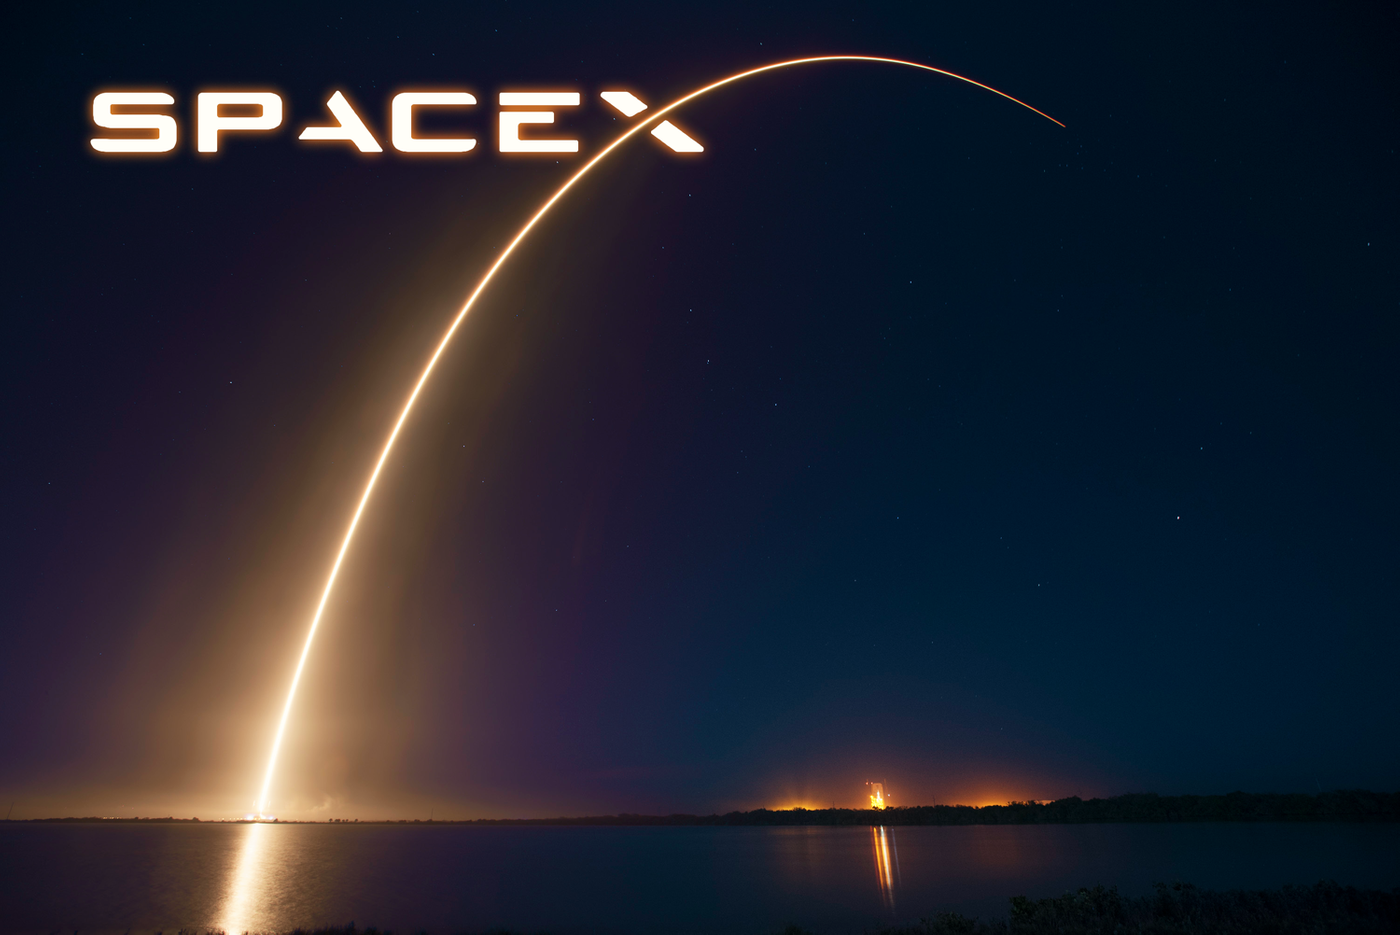 SpaceX intends to increase the frequency of its rocket launches.